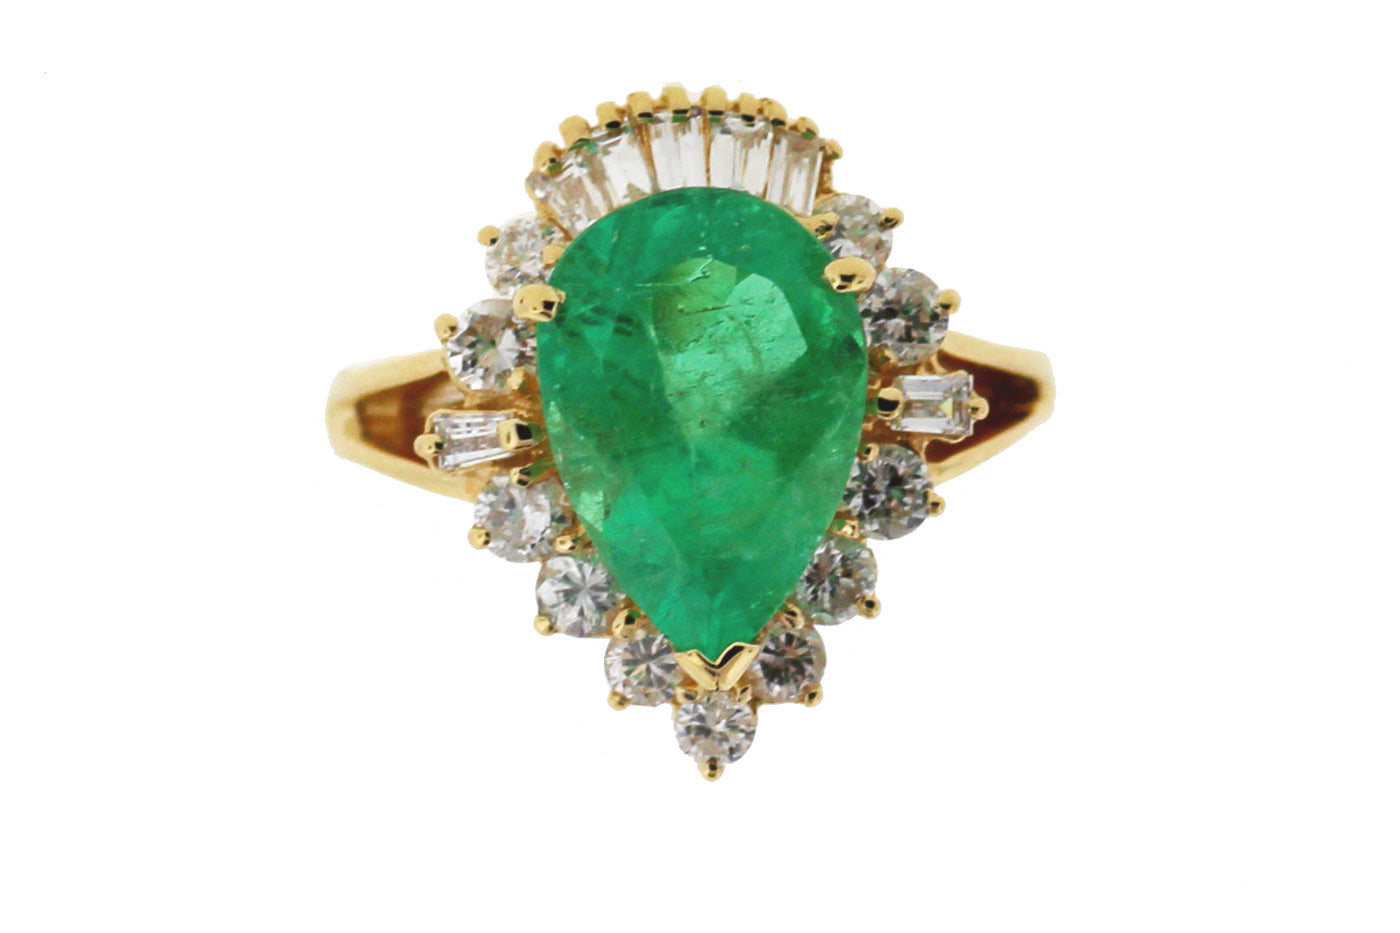 ESTATE 18KY 3.25 CT BRAZILIAN EMERALD AND DIAMOND RING .74 CTTW